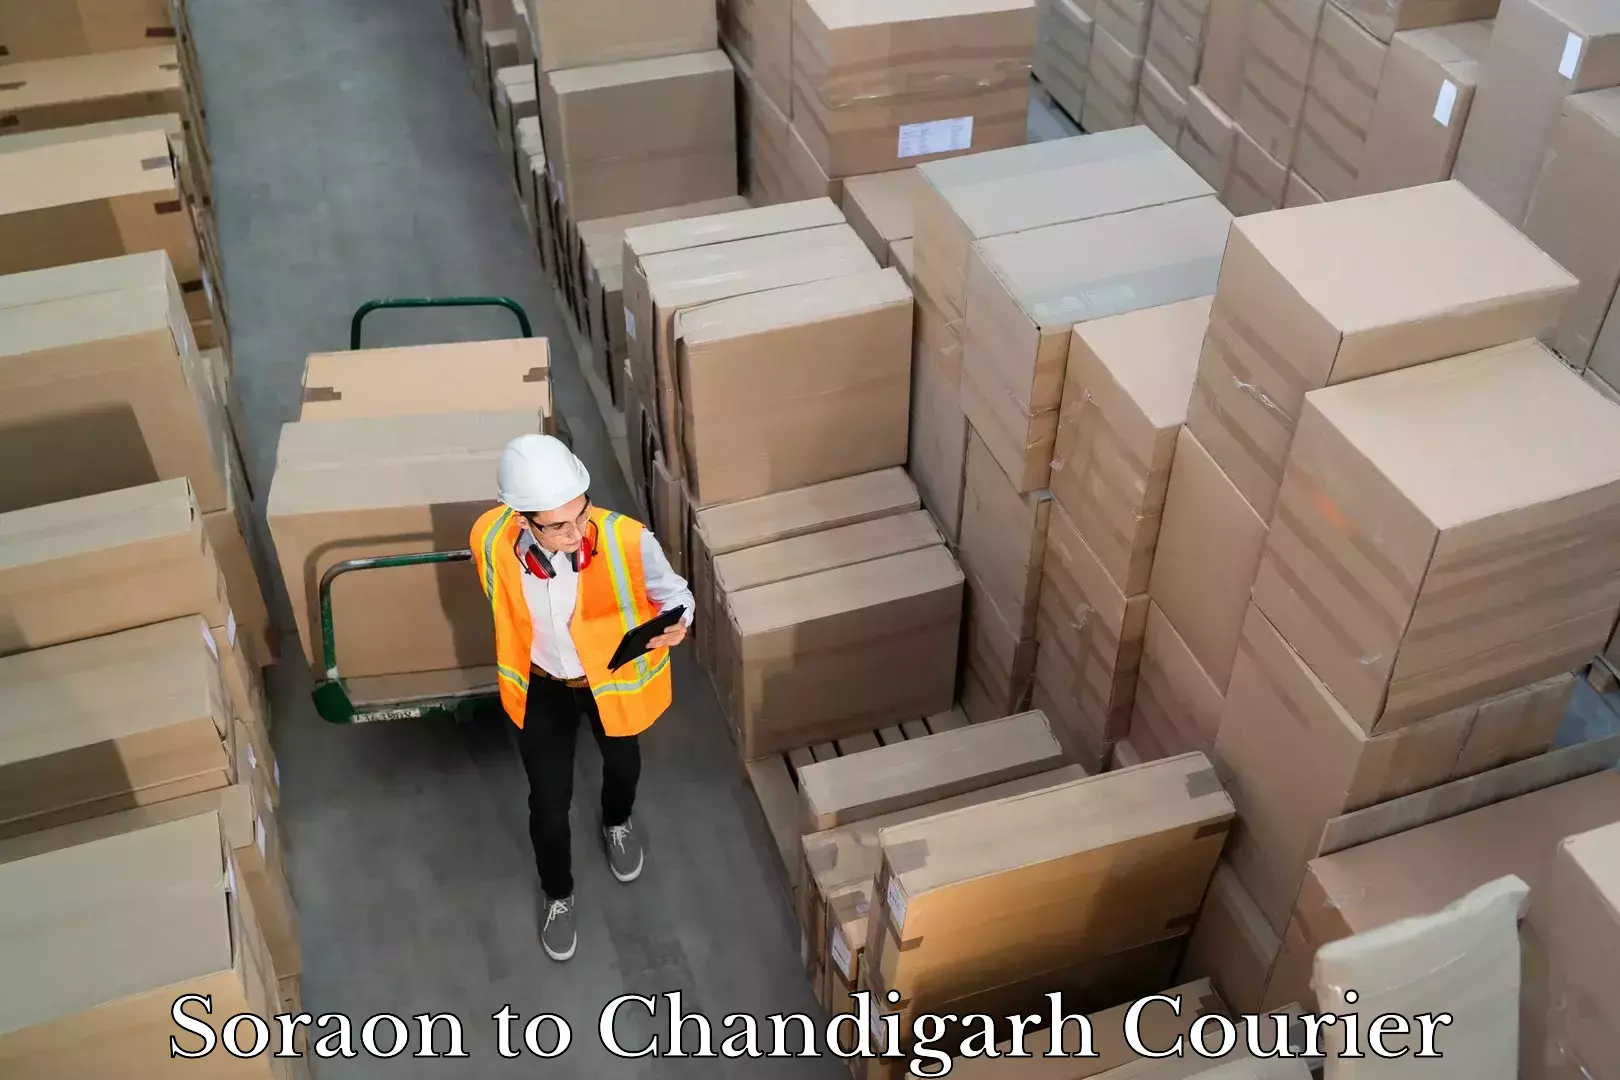 User-friendly courier app Soraon to Chandigarh